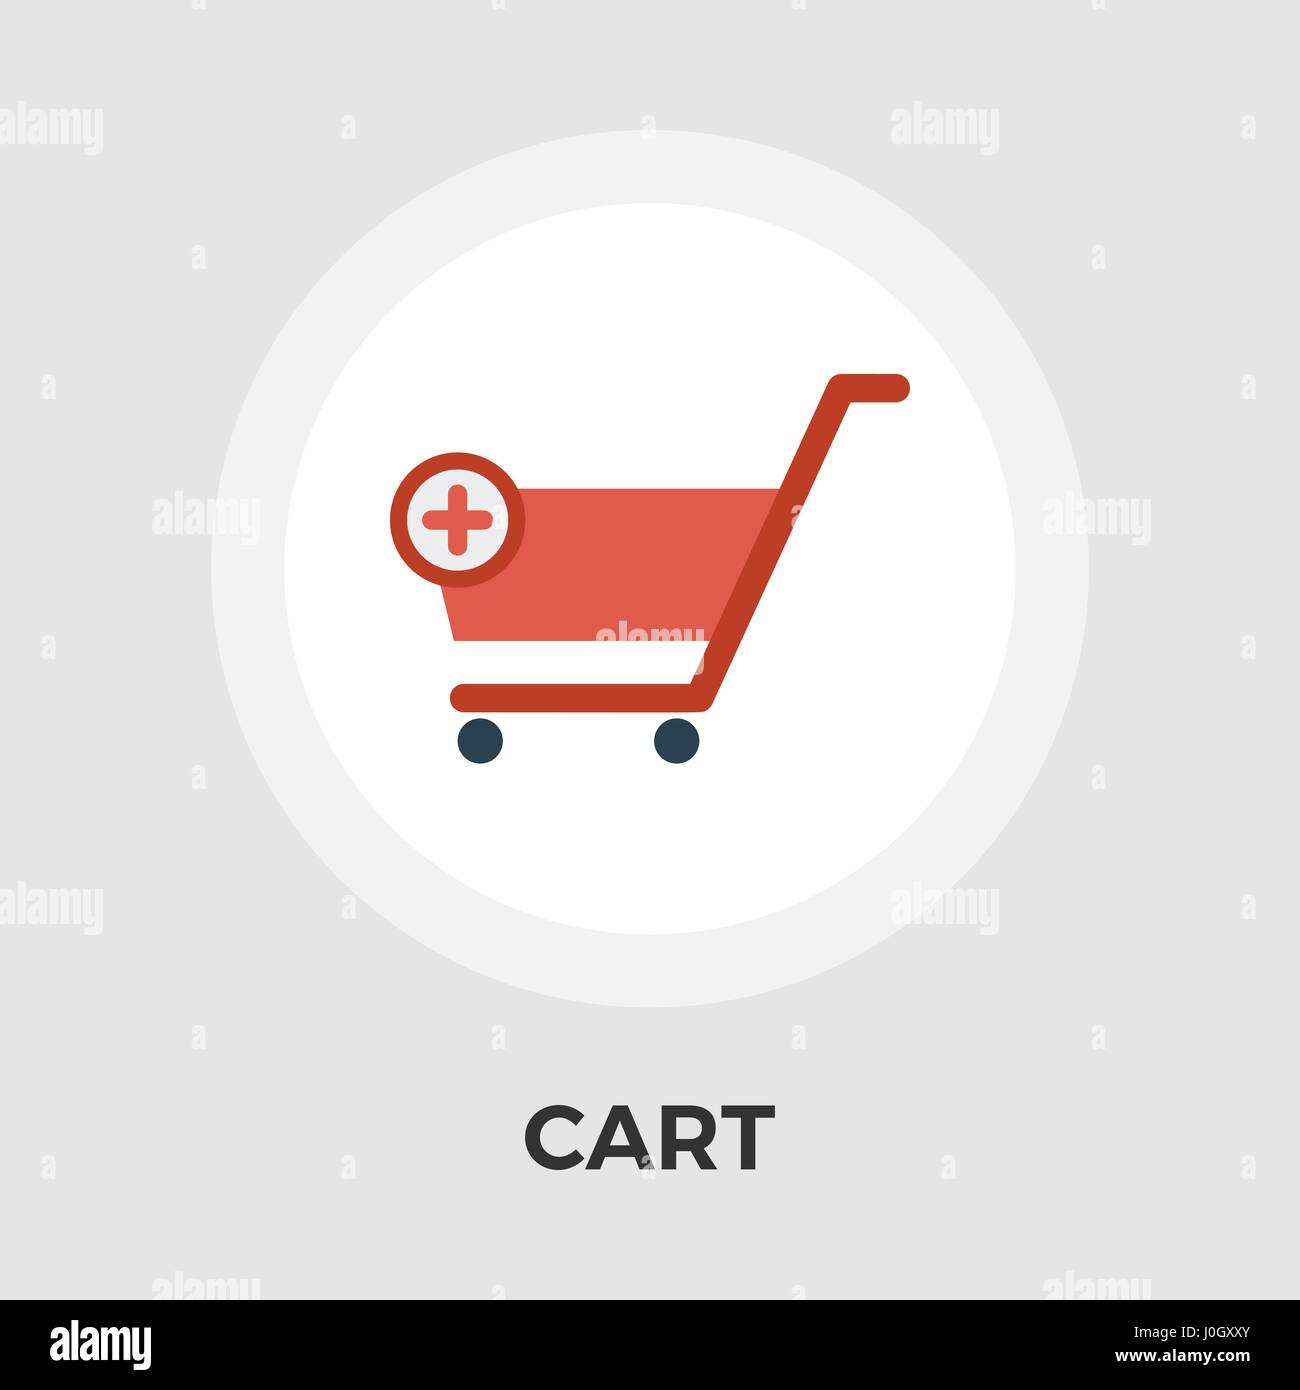 Cart Icon Vector. Flat icon isolated on the white background. Editable EPS file. Vector illustration. Stock Vector